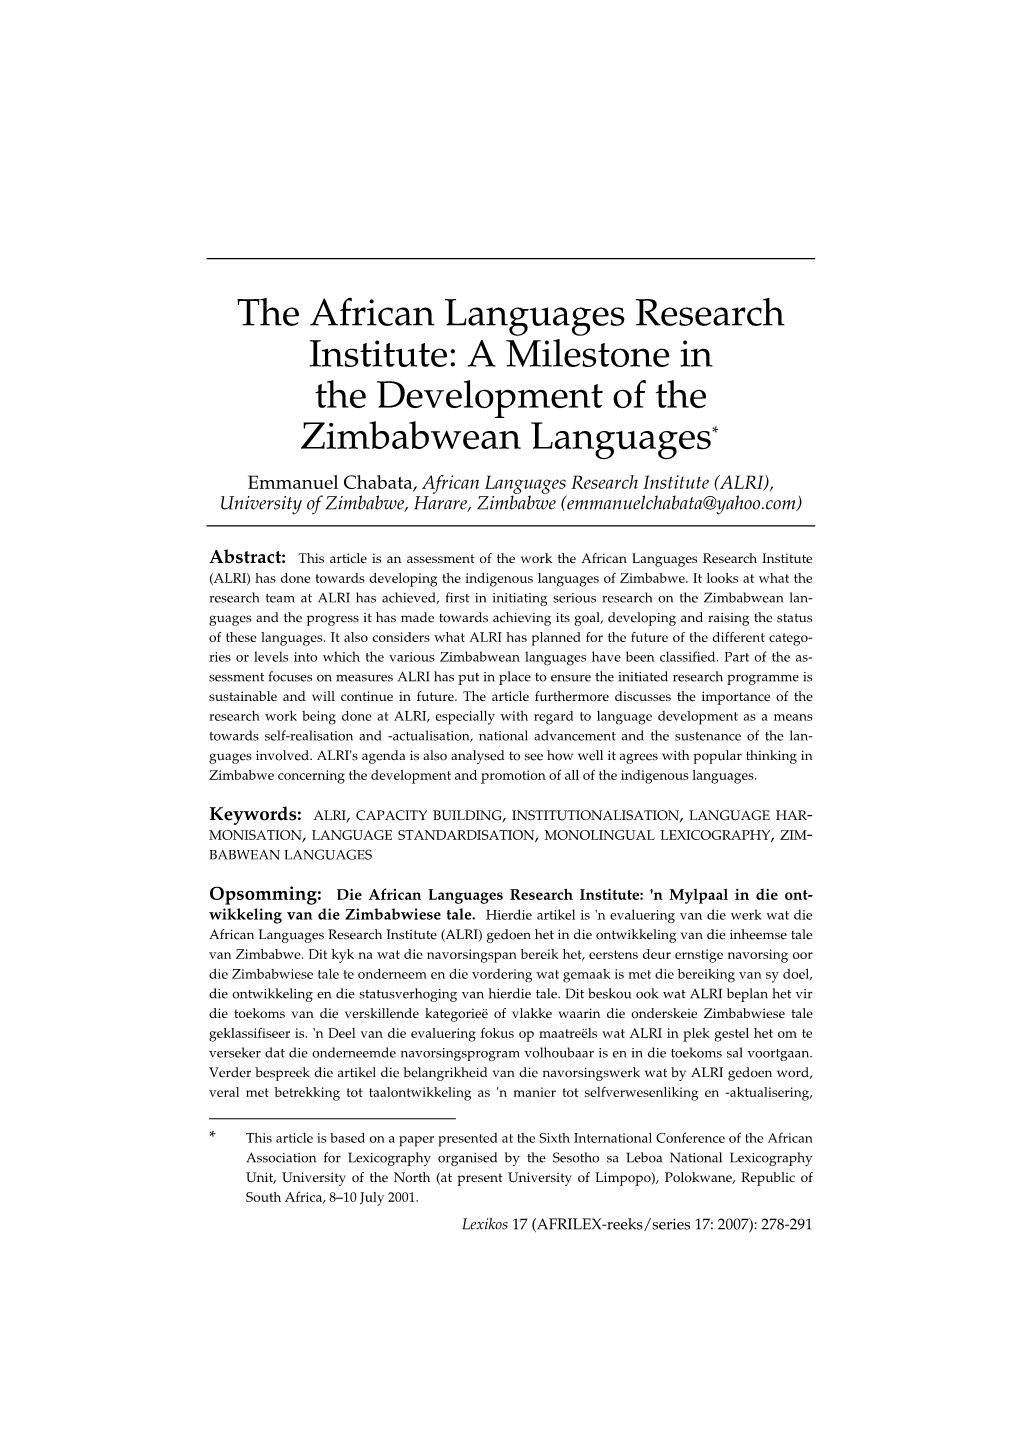 The African Languages Research Institute: a Milestone in The